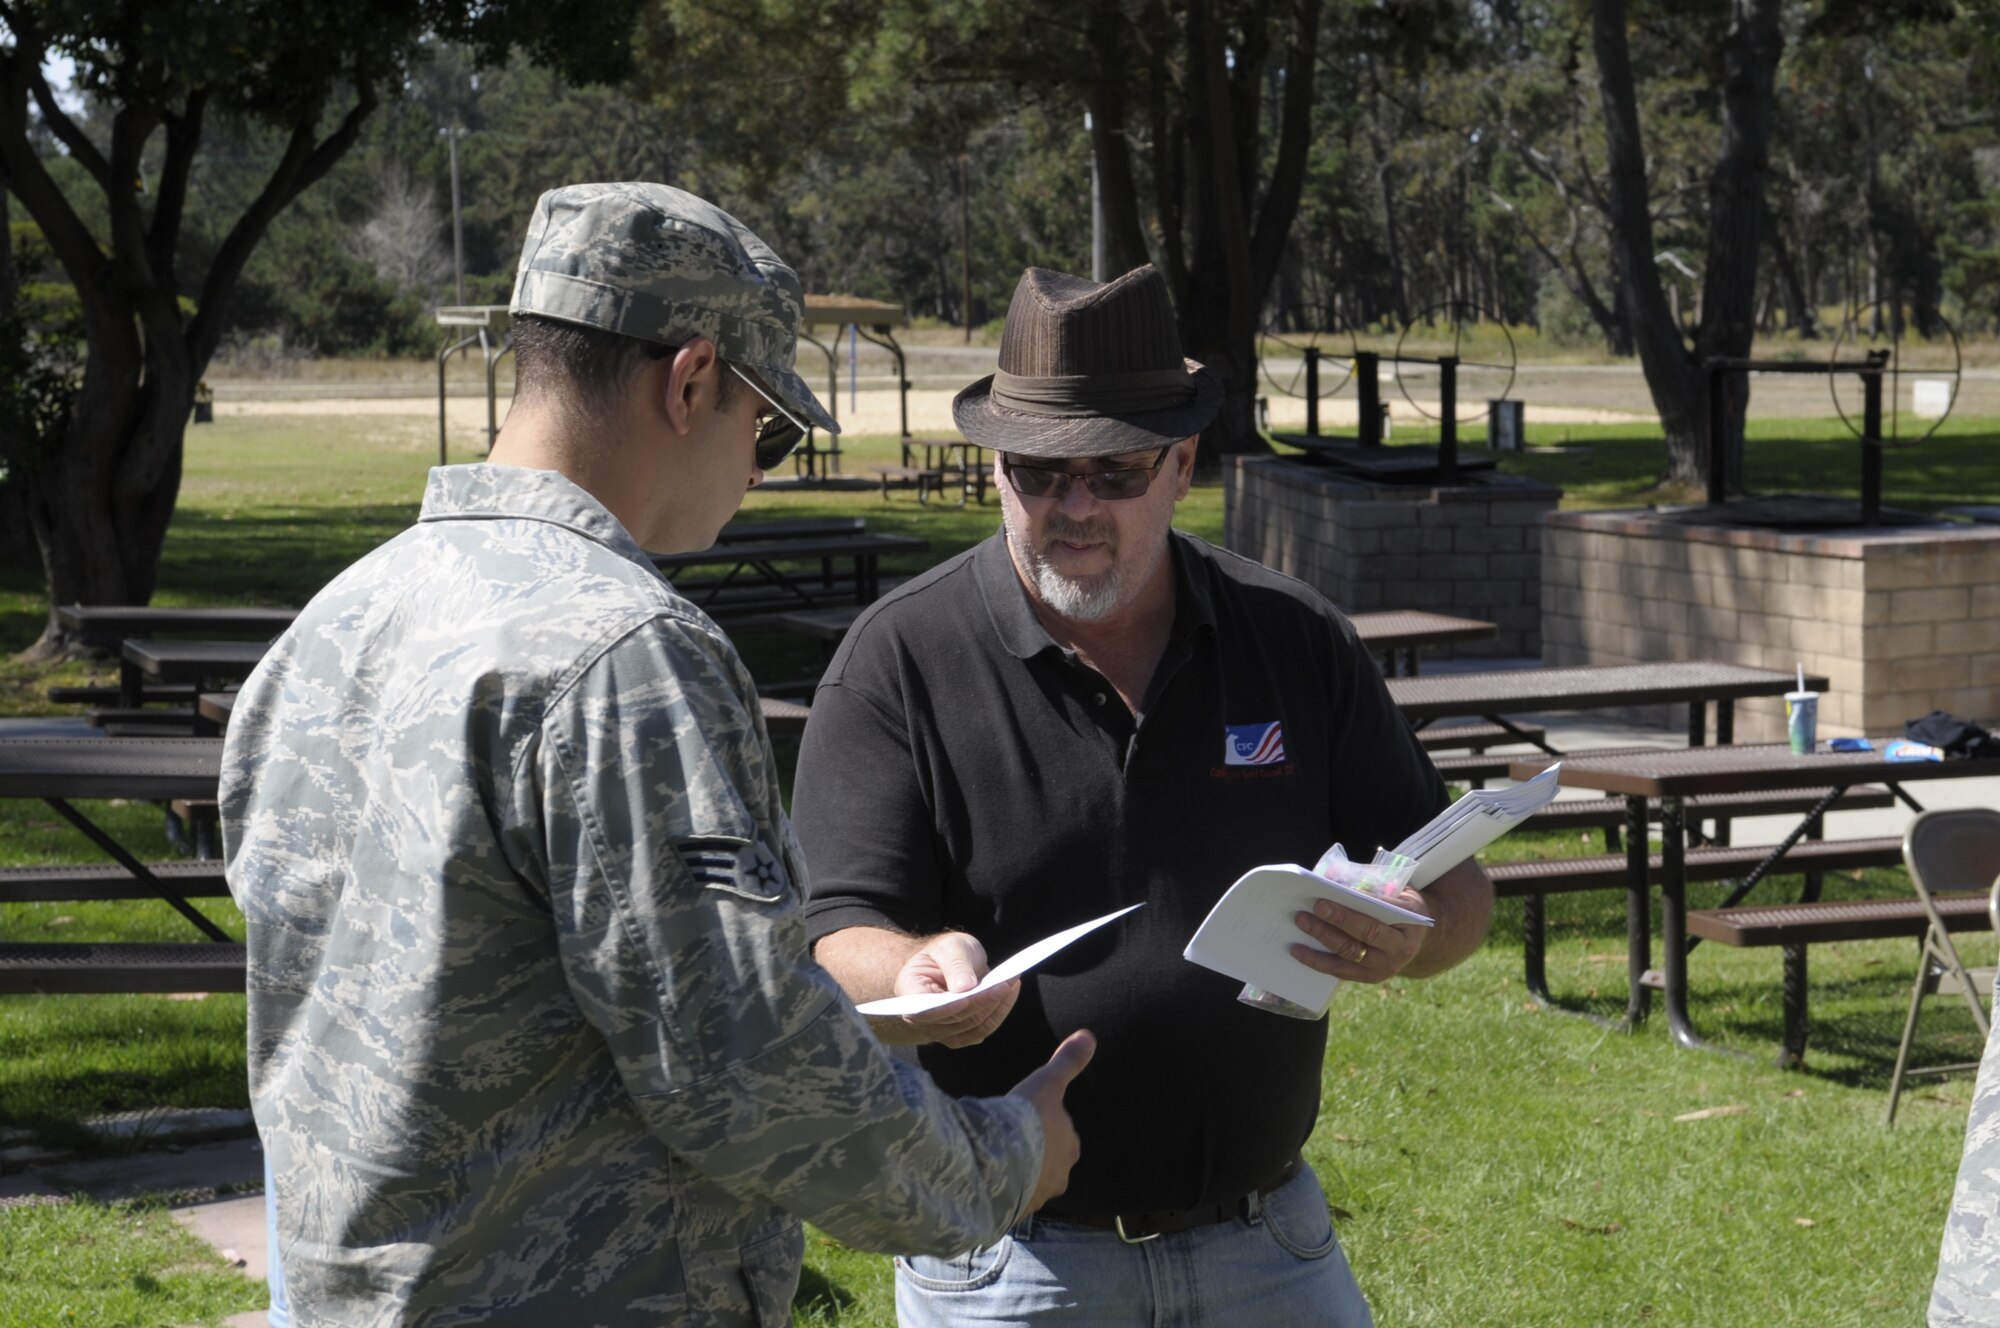 VANDENBERG AIR FORCE BASE, Calif. -- George Smith, California Gold Coast Combined Federal Campaign assistant director, hands out sign-in sheets to Team Vandenberg members at an ice cream social held at Cocheo Park here Monday, Oct. 3, 2011.  The California Gold Coast Combined Federal Campaign hosted a free ice cream social to provide information about this year’s campaign.
(U.S. Air Force photo/Jerry E. Clemens, Jr.)